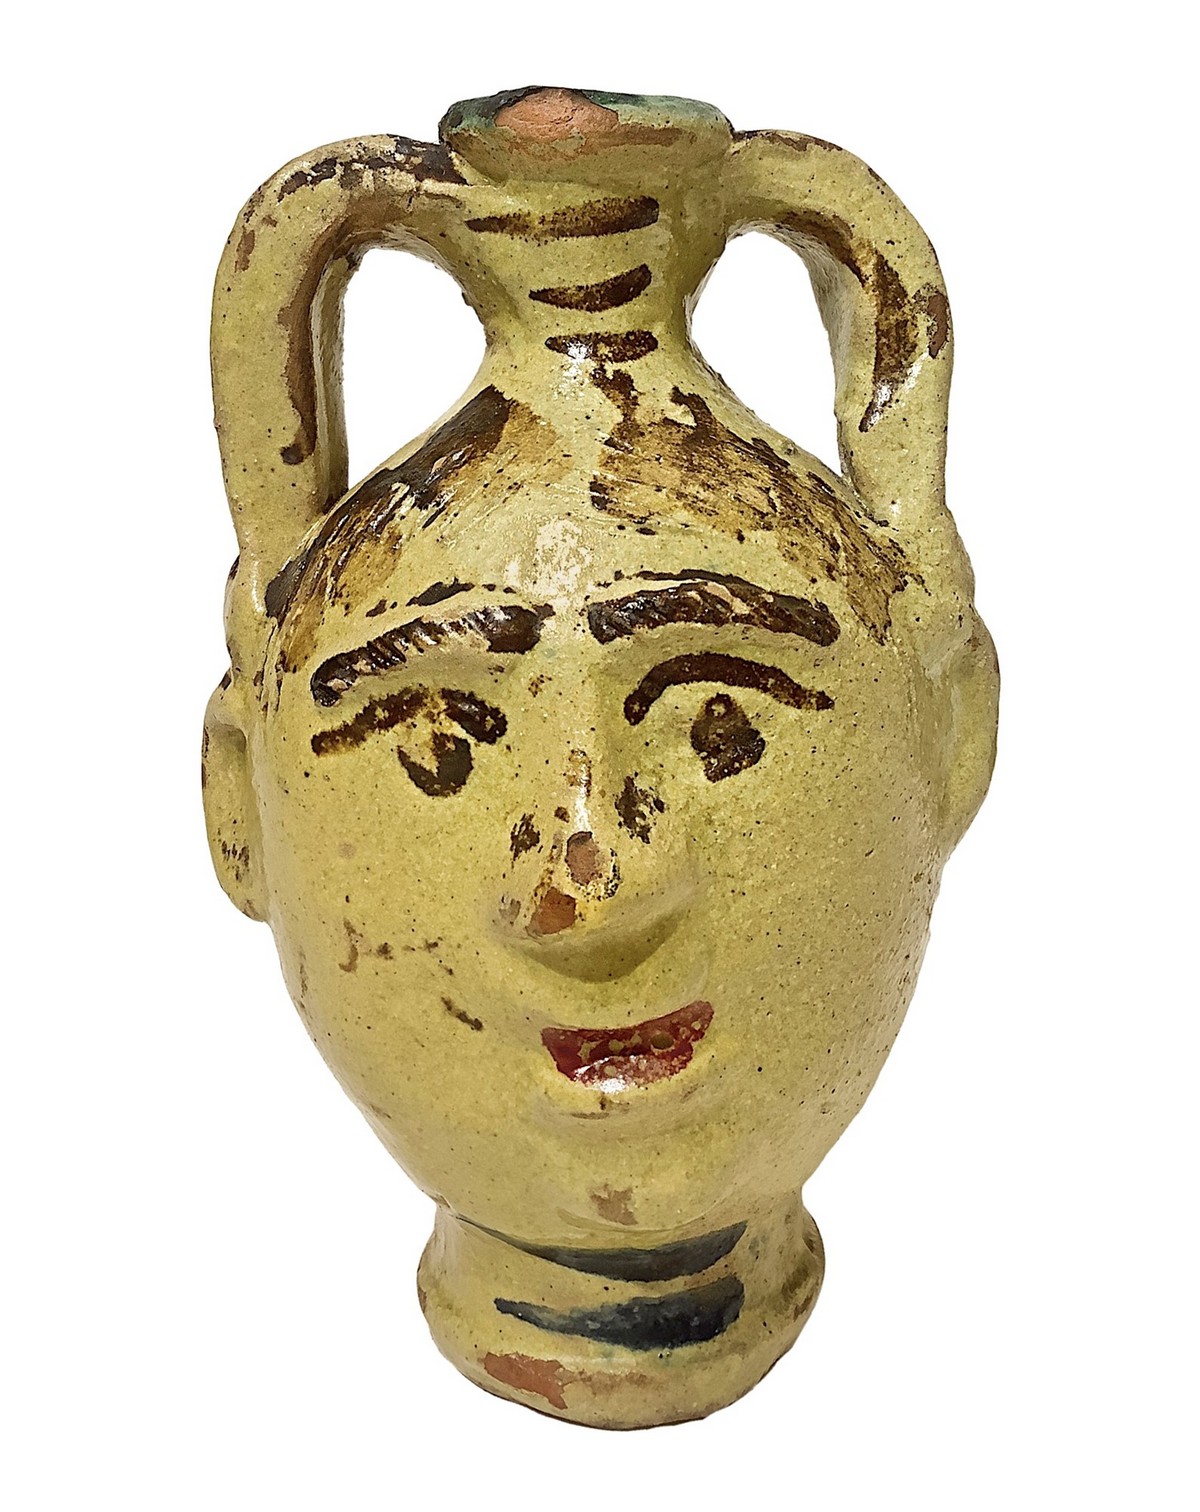 Small jar of Caltagirone of anthropomorphic figure, Early 20th century